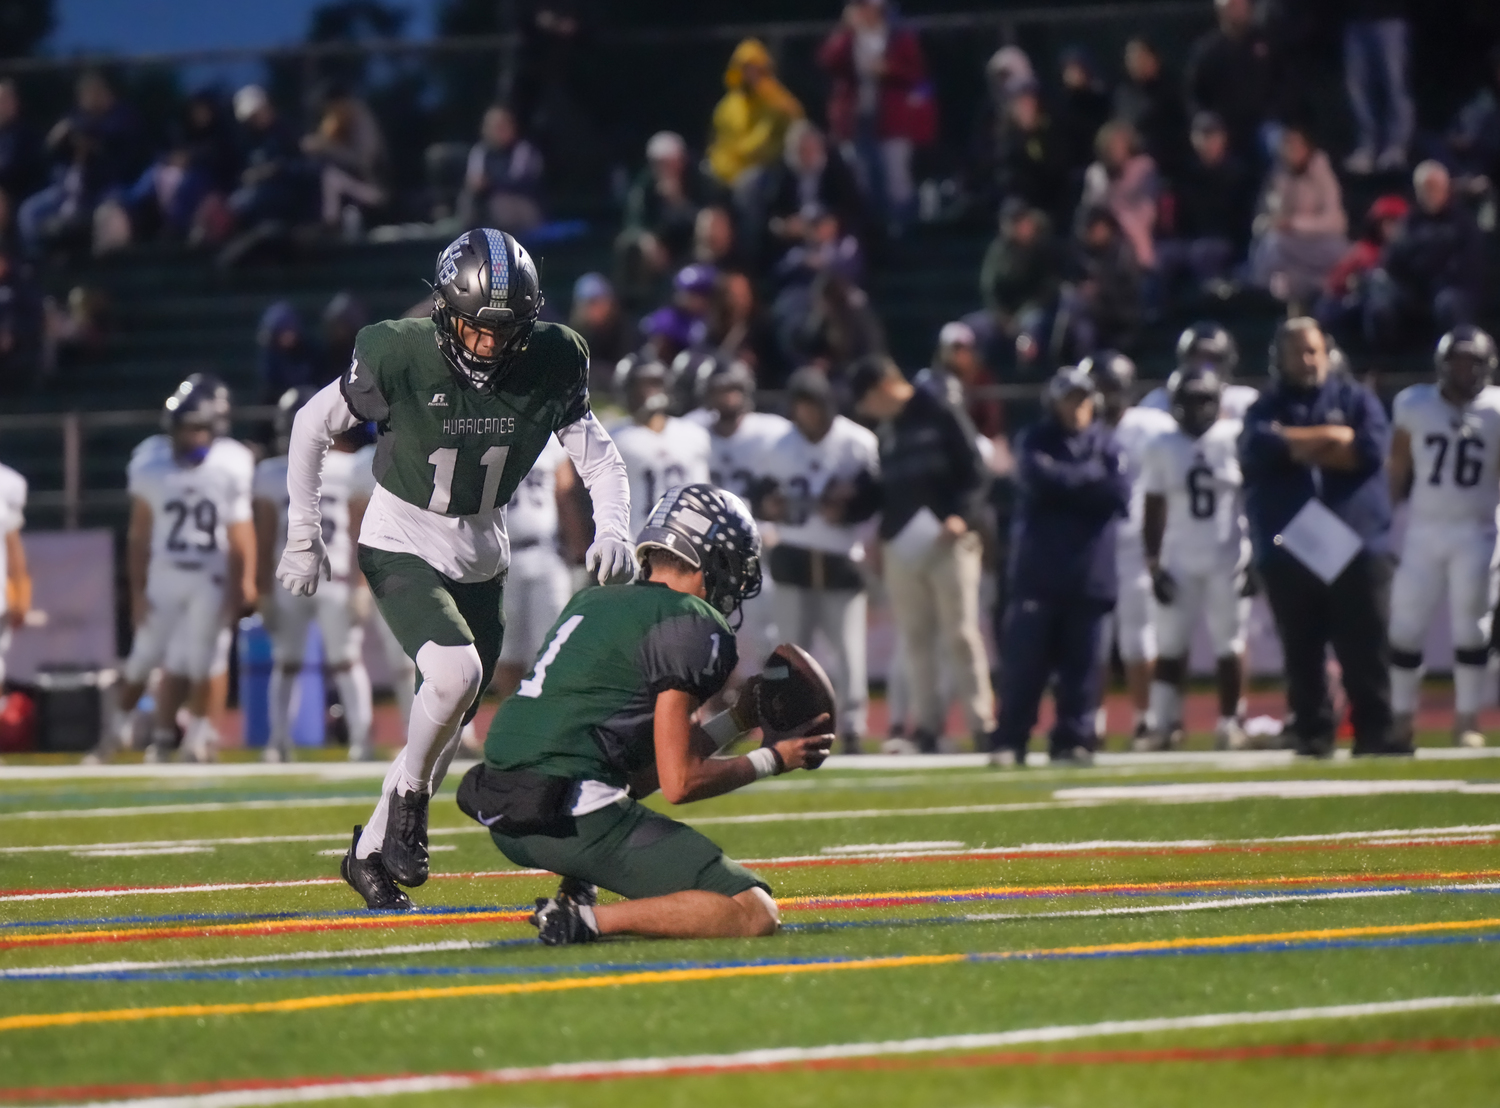 Westhampton Beach senior Michael LoRusso gets set to kick an extra point. He was 6 for 6 throughout the game.   RON ESPOSITO